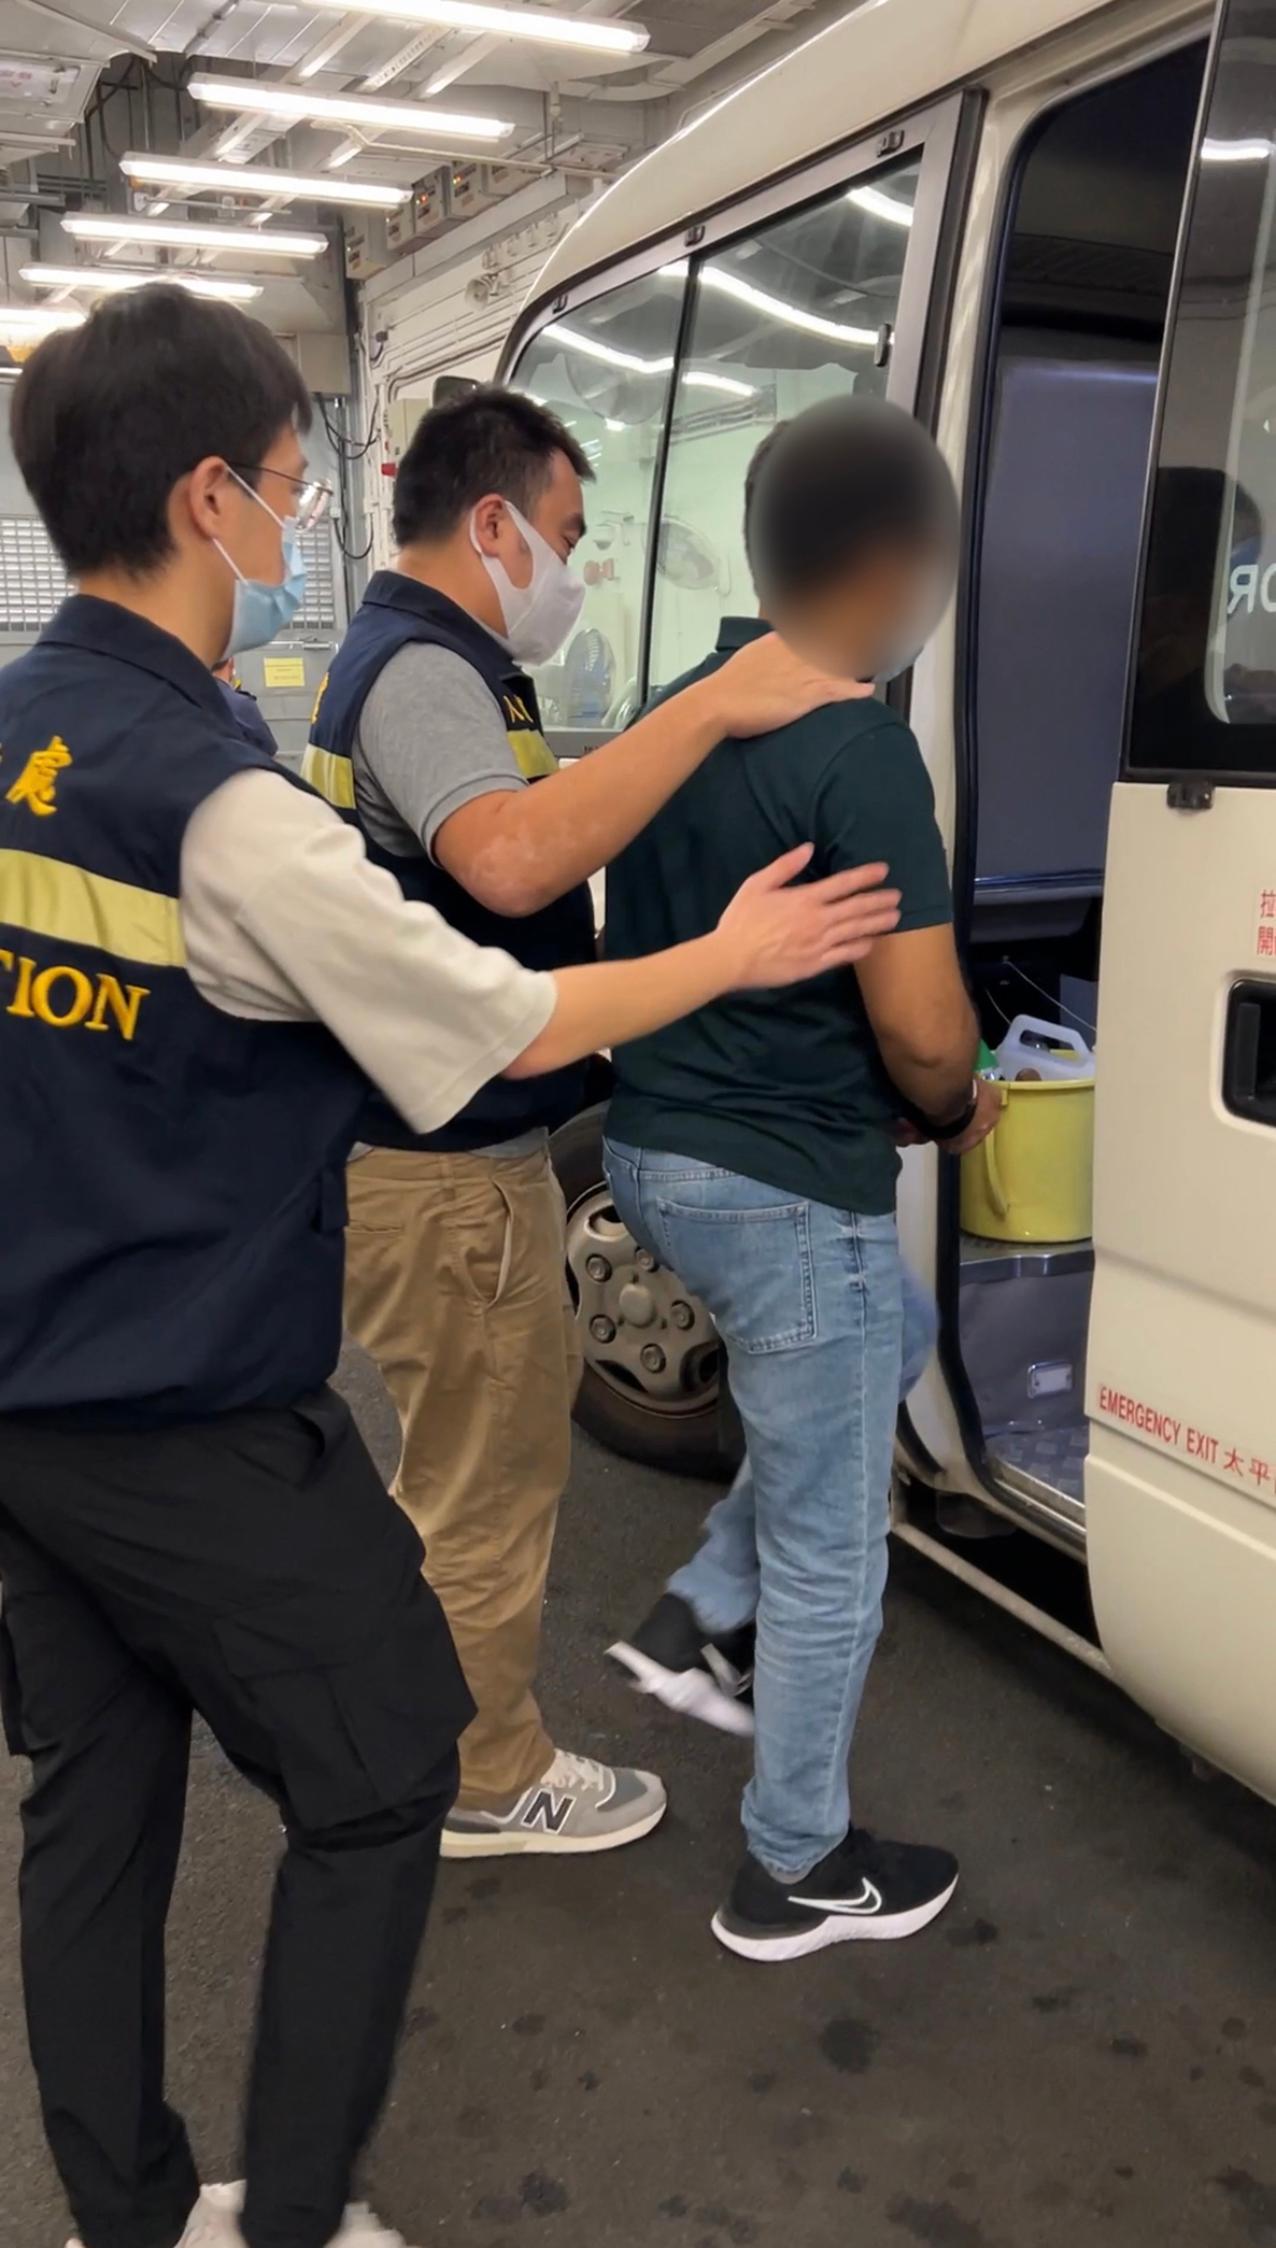 The Immigration Department (ImmD) carried out repatriation operations from September 13 to yesterday (September 20). A total of 45 unsubstantiated non-refoulement claimants were repatriated to their places of origin. Photo shows a removee being escorted by ImmD officers to depart Hong Kong.